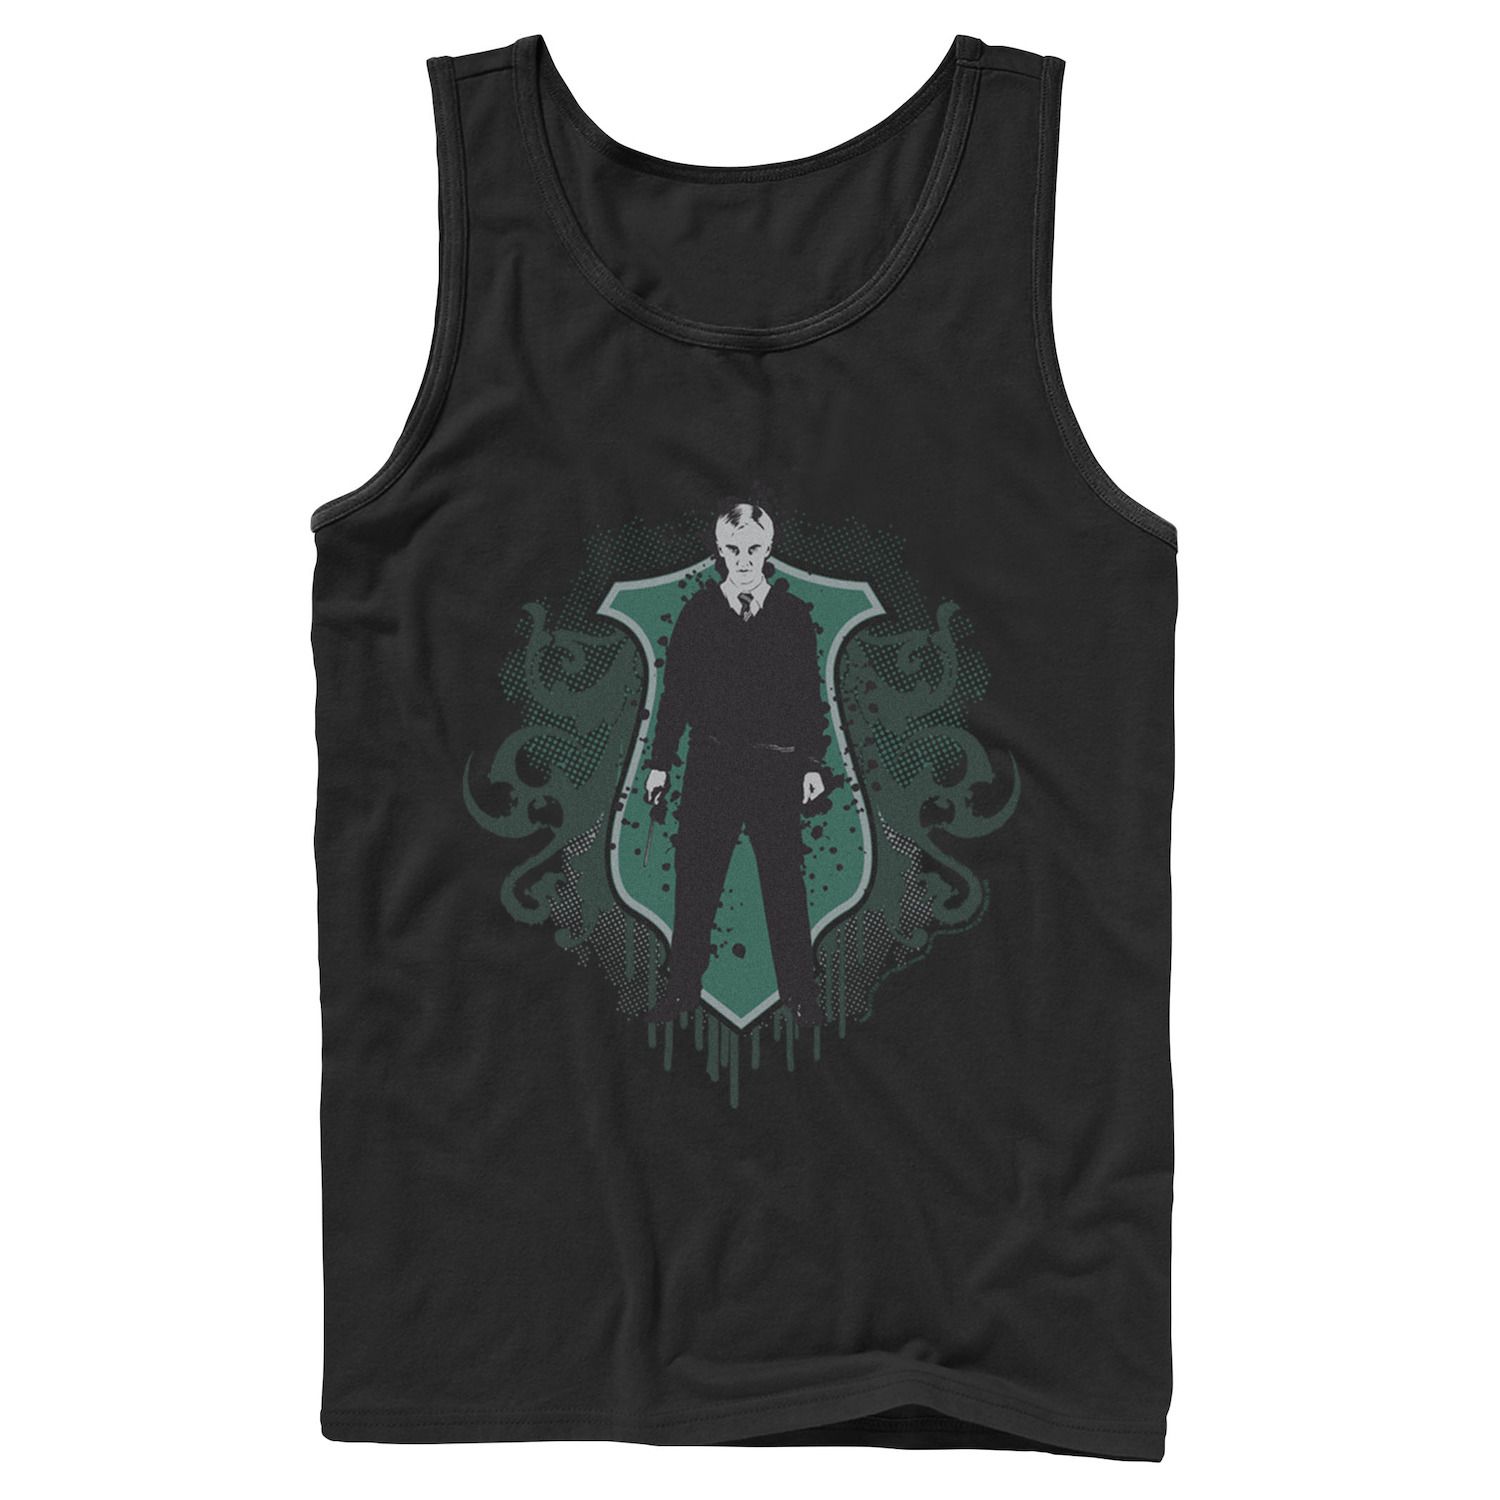 Image for Harry Potter Men's Draco Malfoy Dripping Portrait Graphic Tank Top at Kohl's.